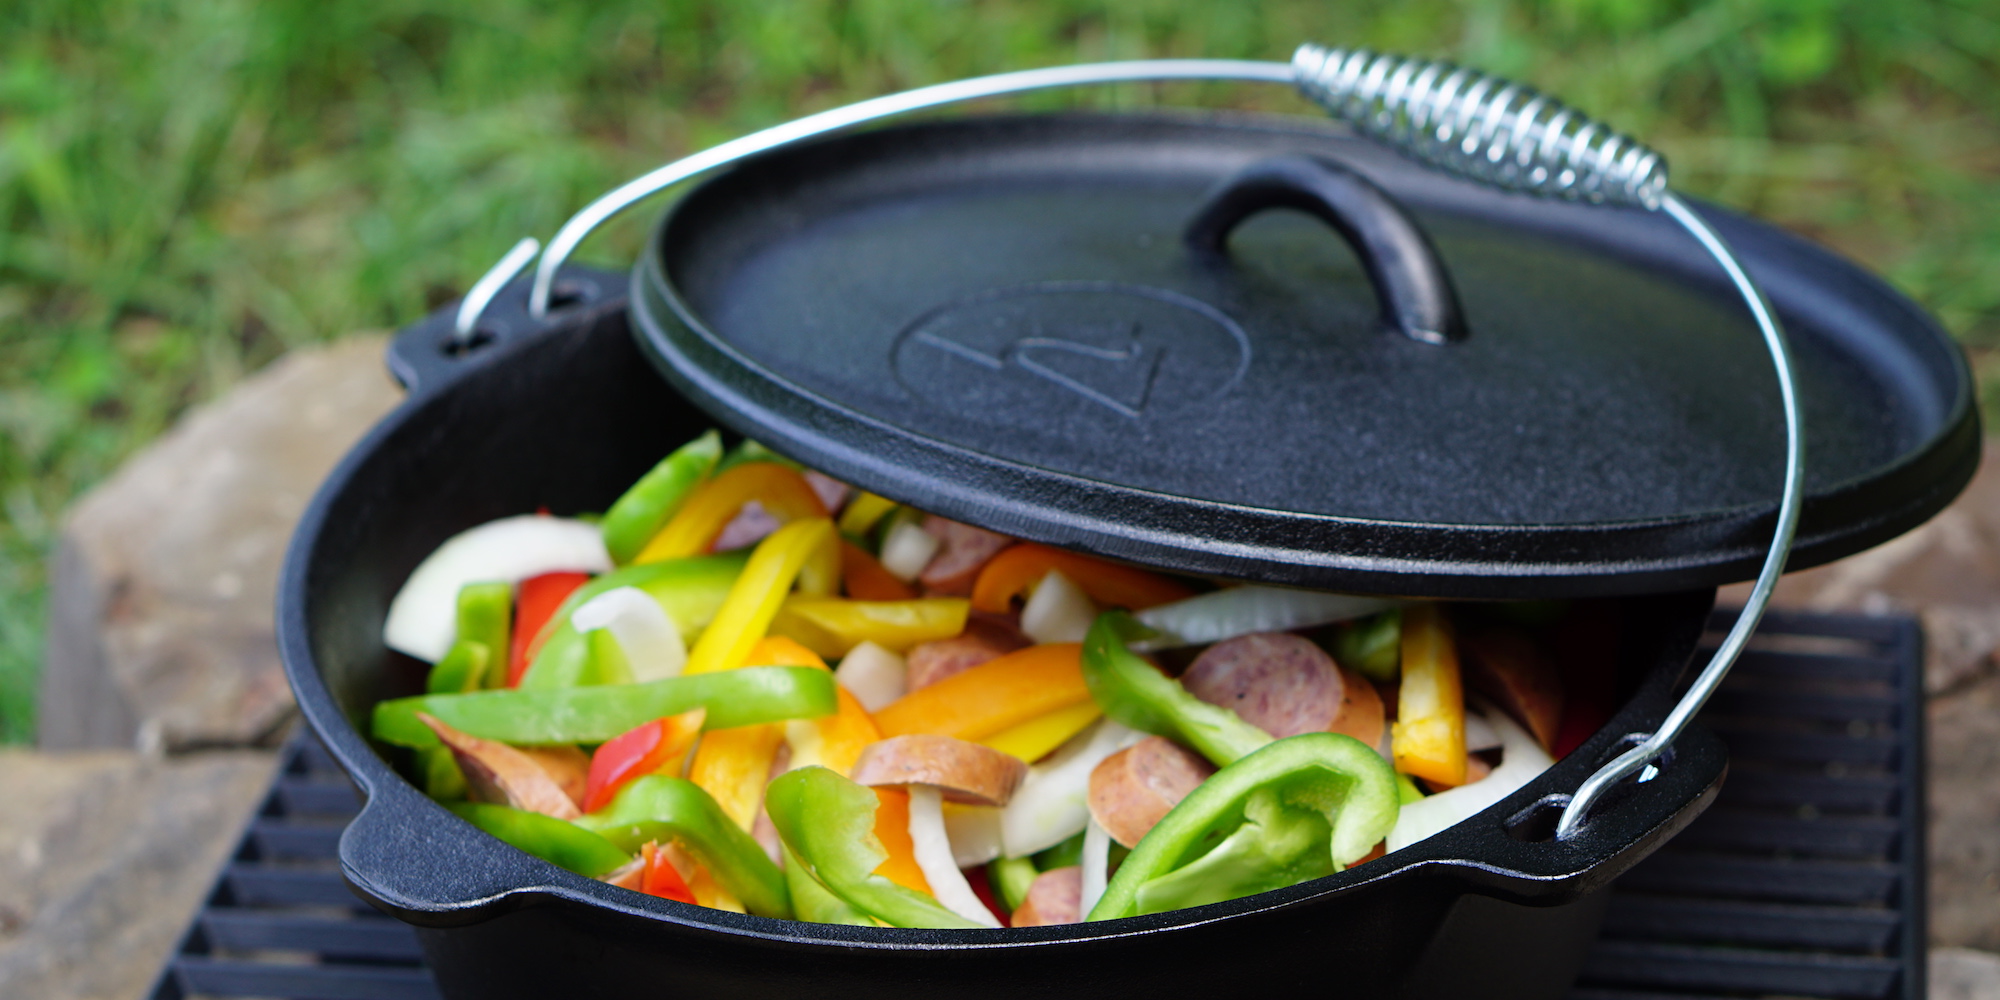 This 5-quart Cast Iron Dutch Oven is yours for just $15 (Reg. up to $26)